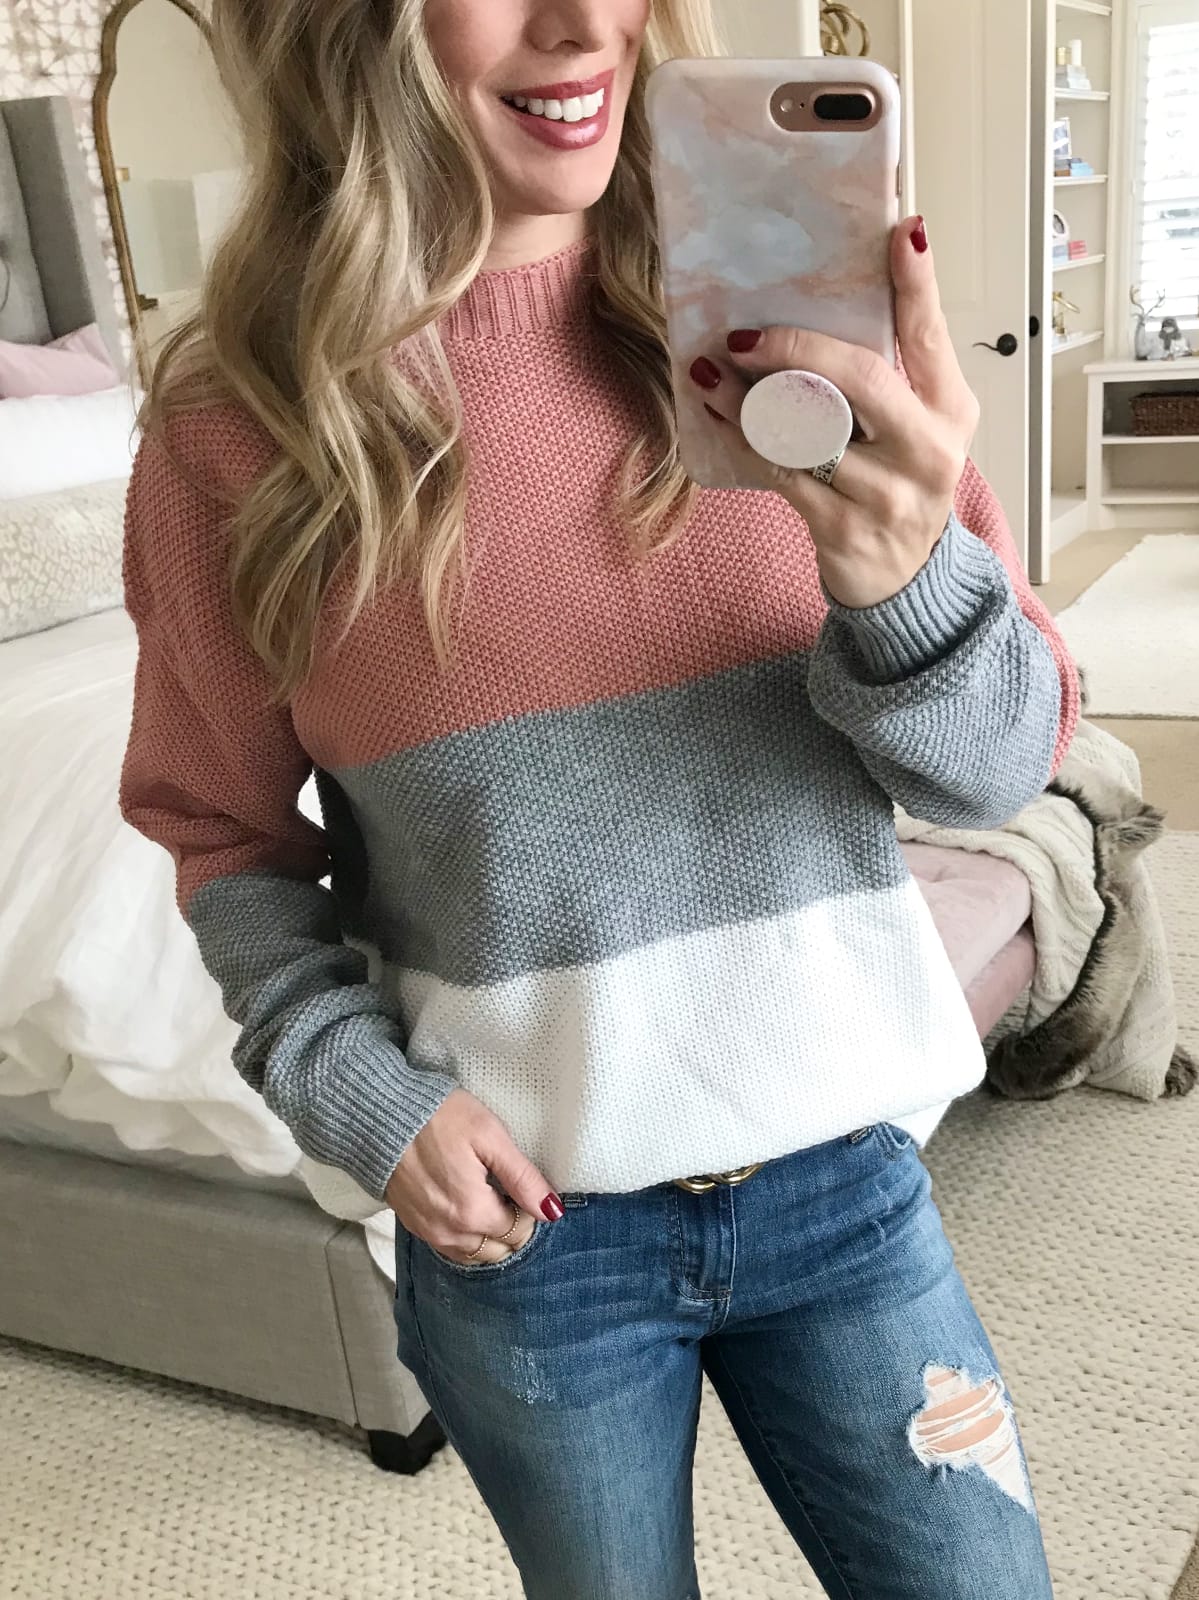 Amazon Fashion Haul - jeans and striped sweater (1)